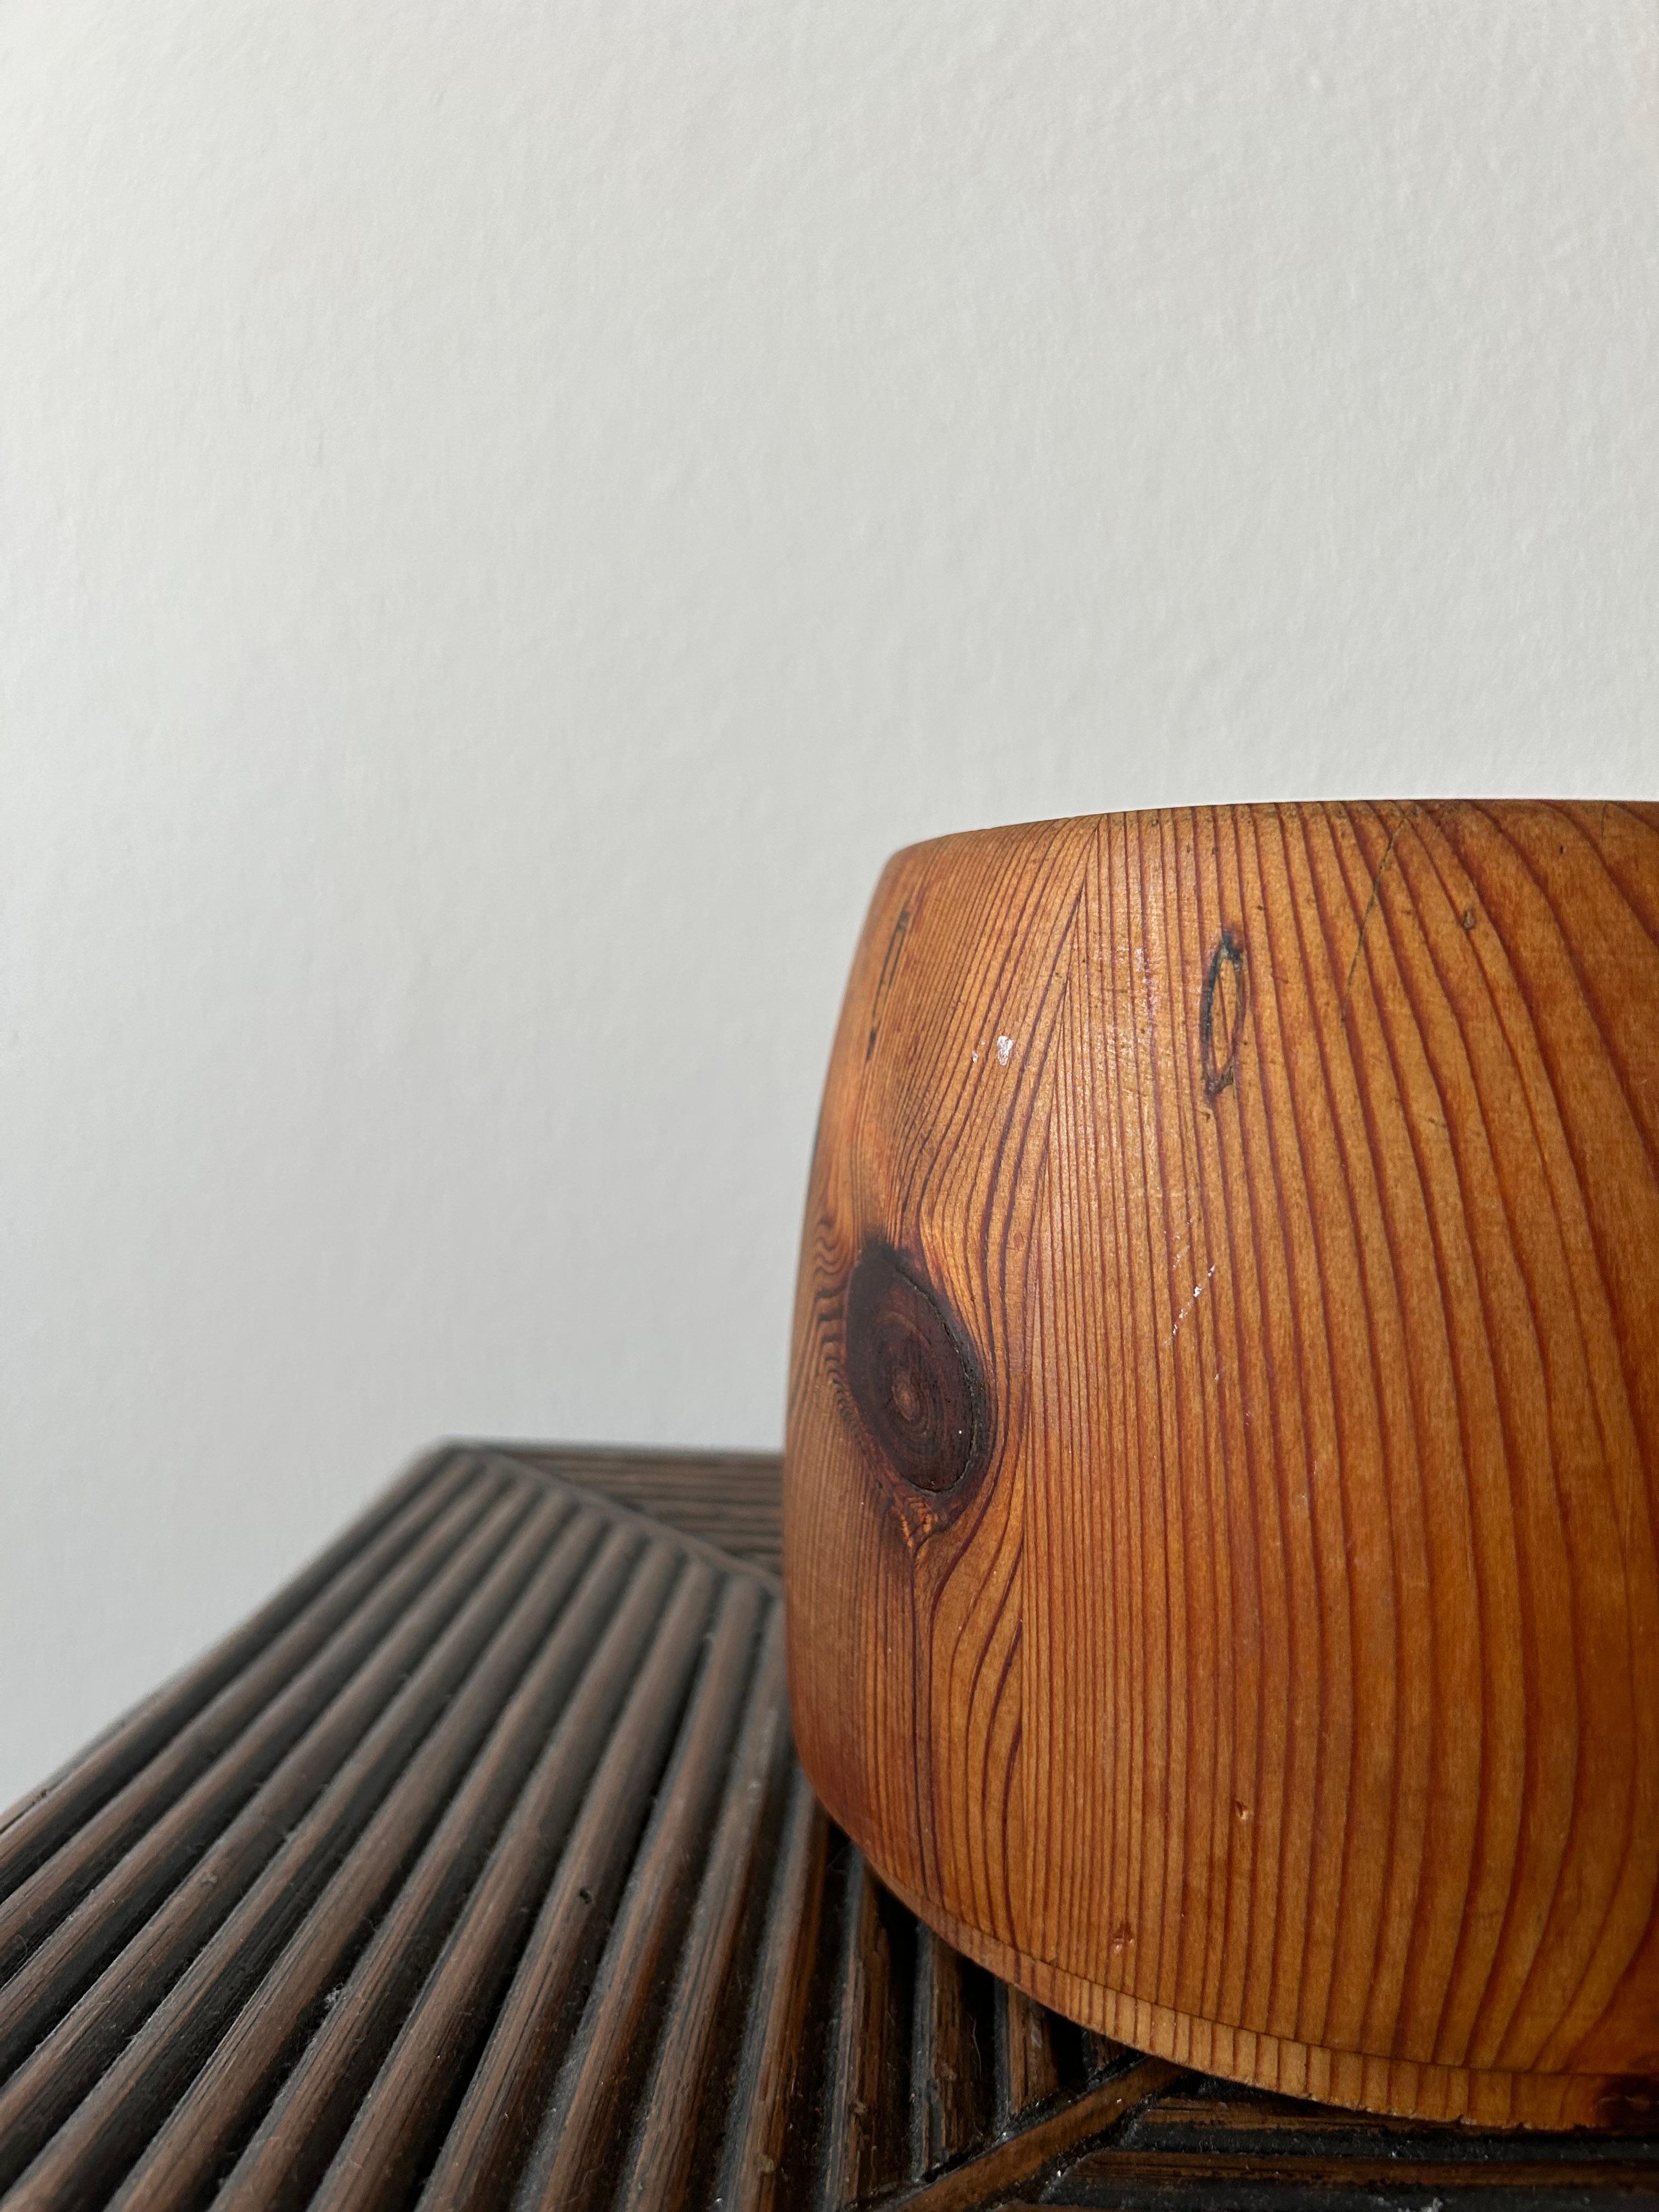 Rare Swedish Pine bowl from the 1960s in Sportsstuge style with a beautiful patina in the manner of Axel Einar Hjorth and Roland Wilhelmsson.

This bowl is a beautiful addition to any interior and will fit any interior from the typical